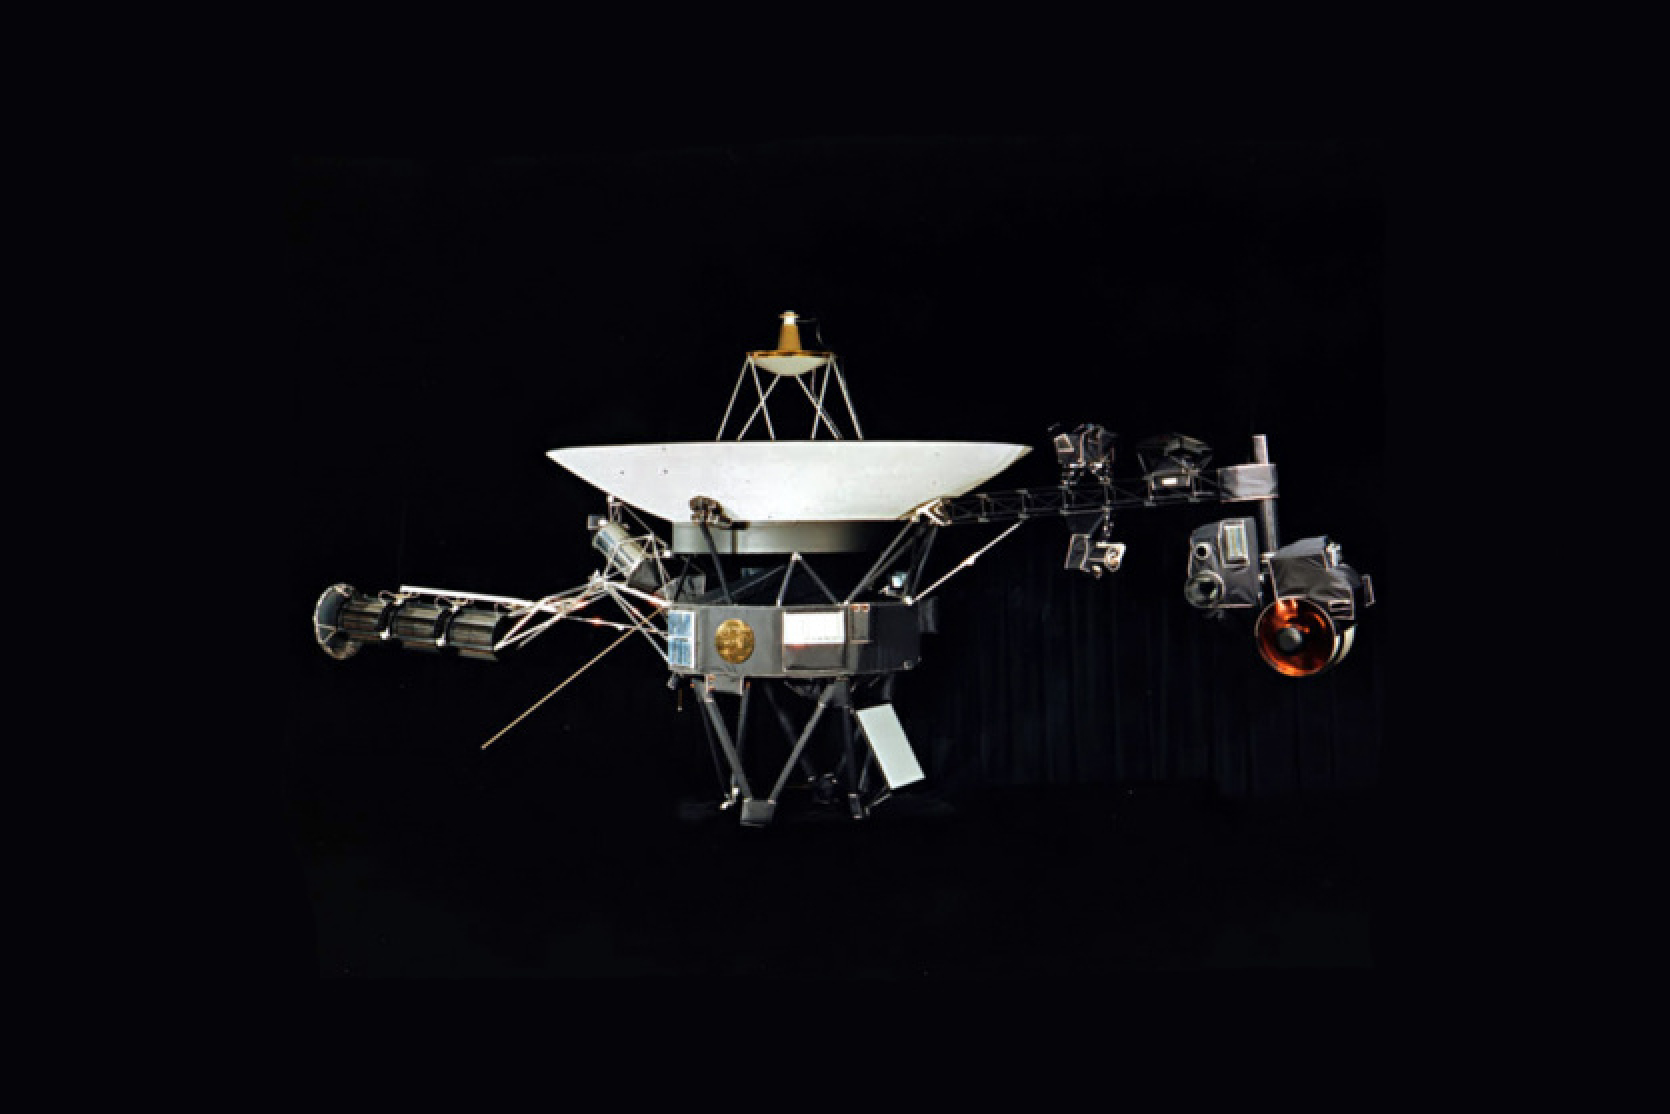 Legendary Voyager 1 "called" home after 5 months of no communications